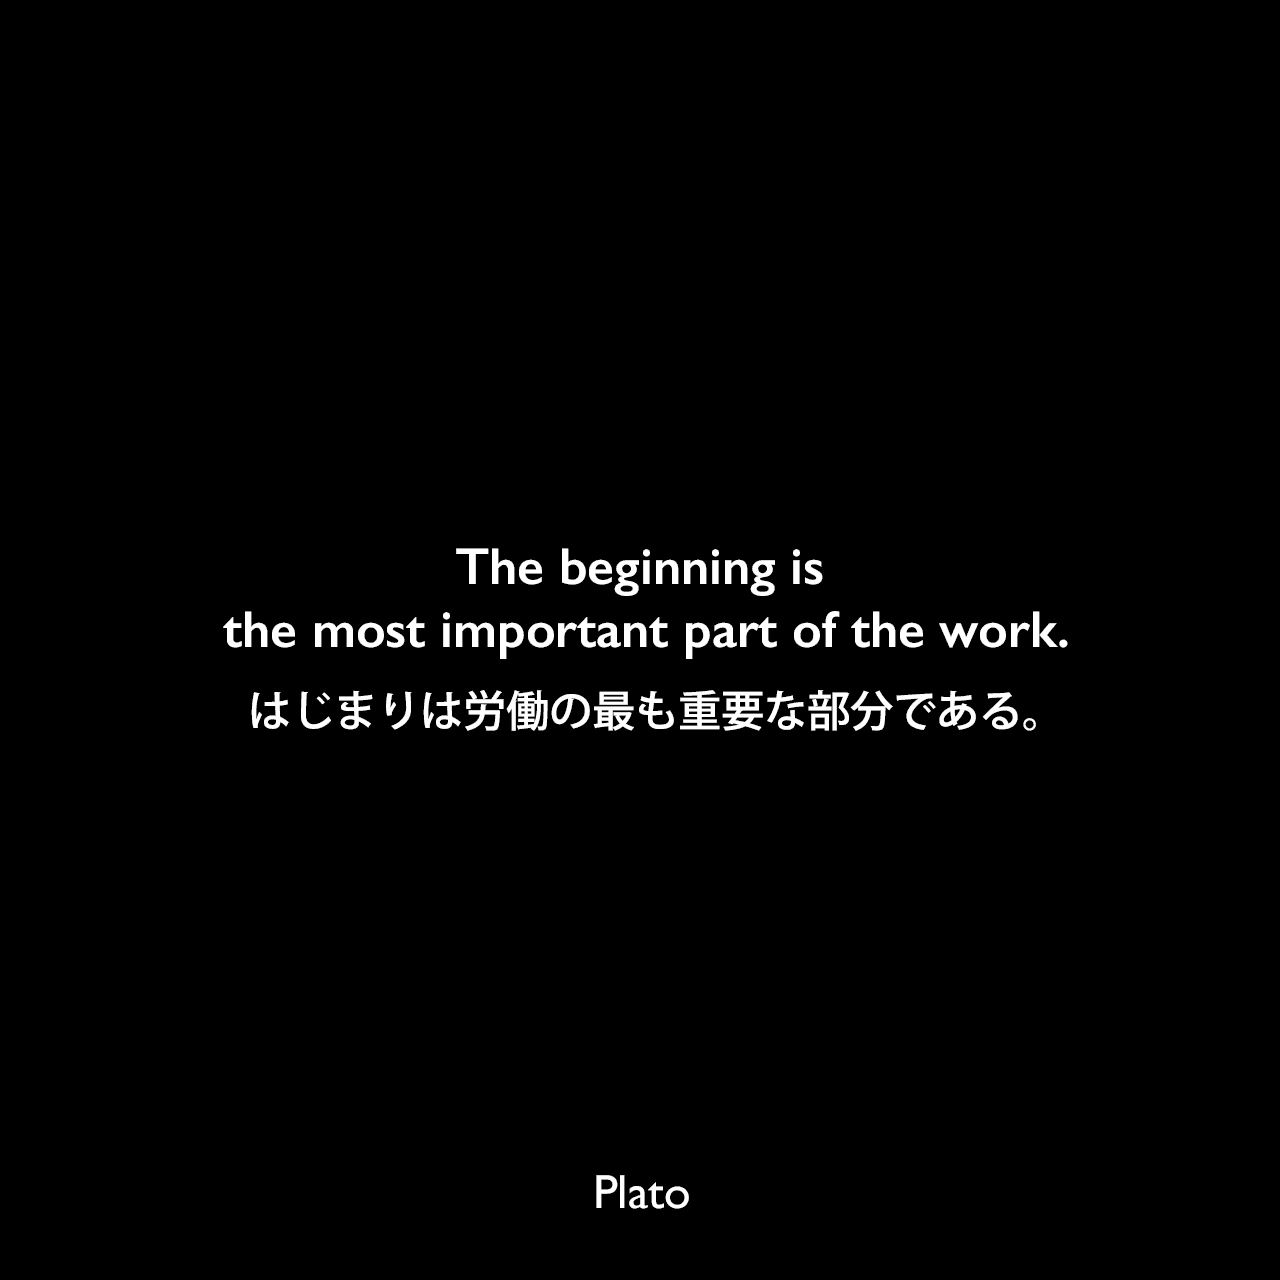 The beginning is the most important part of the work.はじまりは労働の最も重要な部分である。Plato